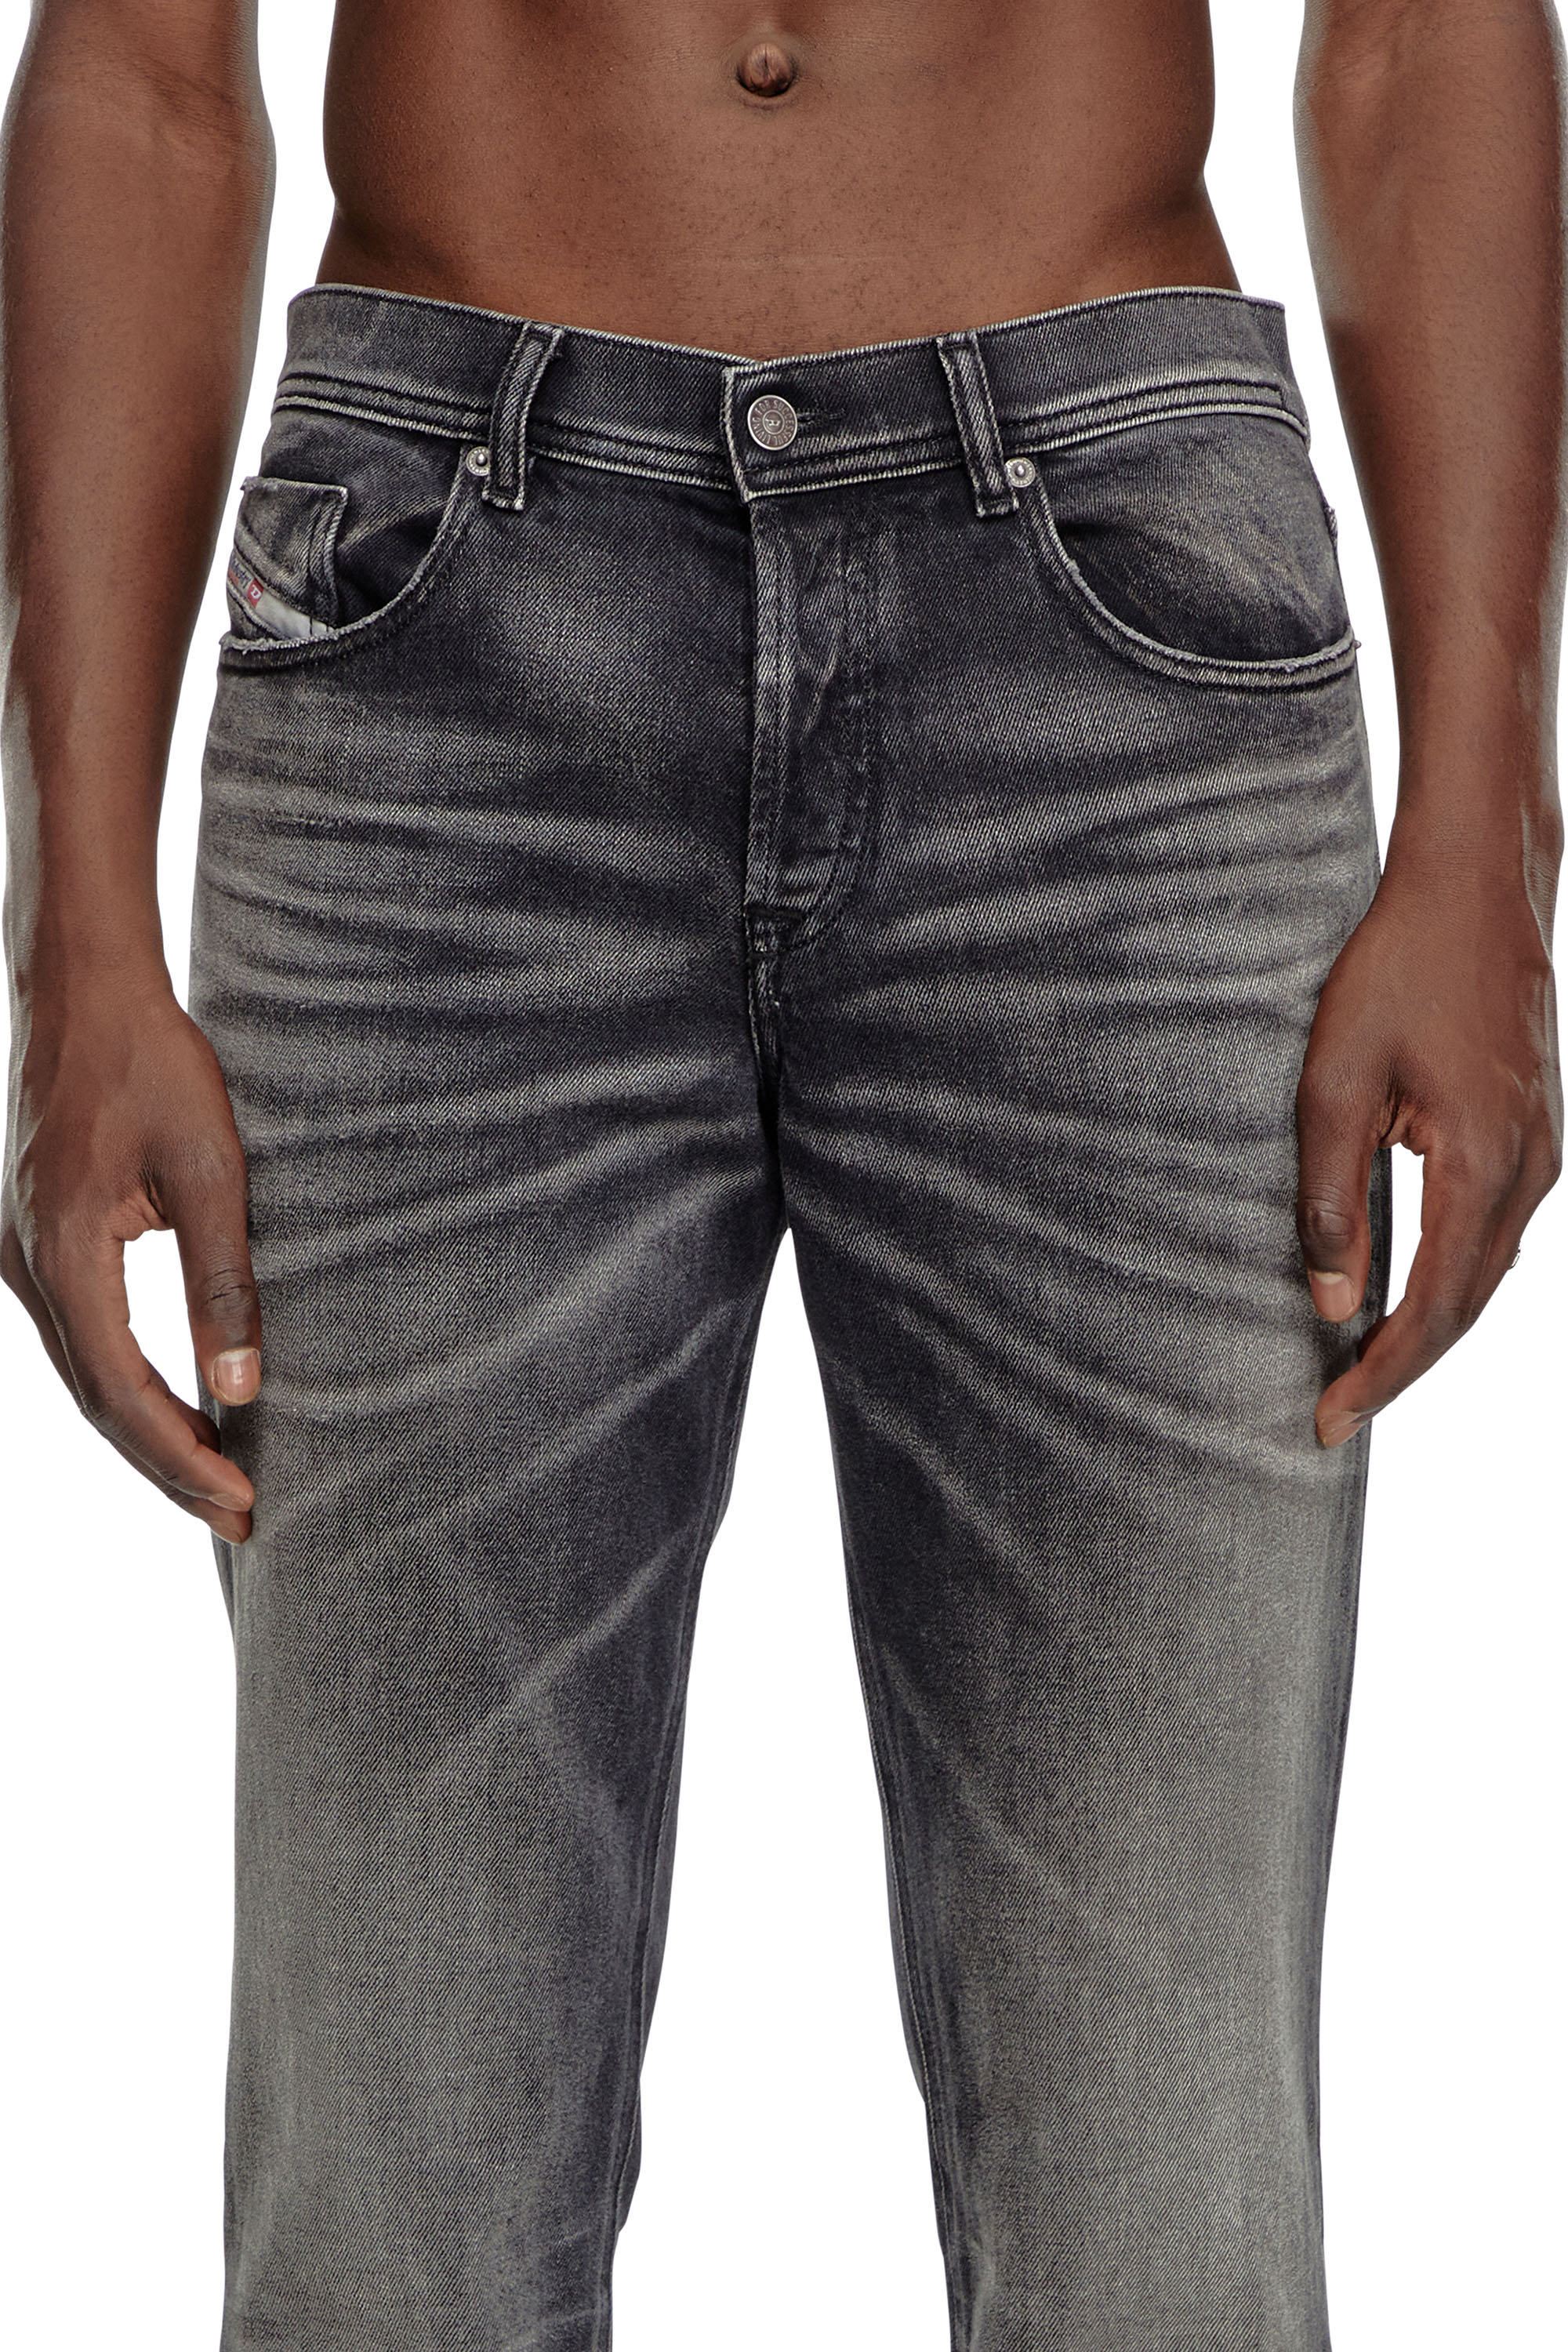 Diesel - Tapered Jeans 2023 D-Finitive 09J65, Hombre Tapered Jeans - 2023 D-Finitive in Negro - Image 4